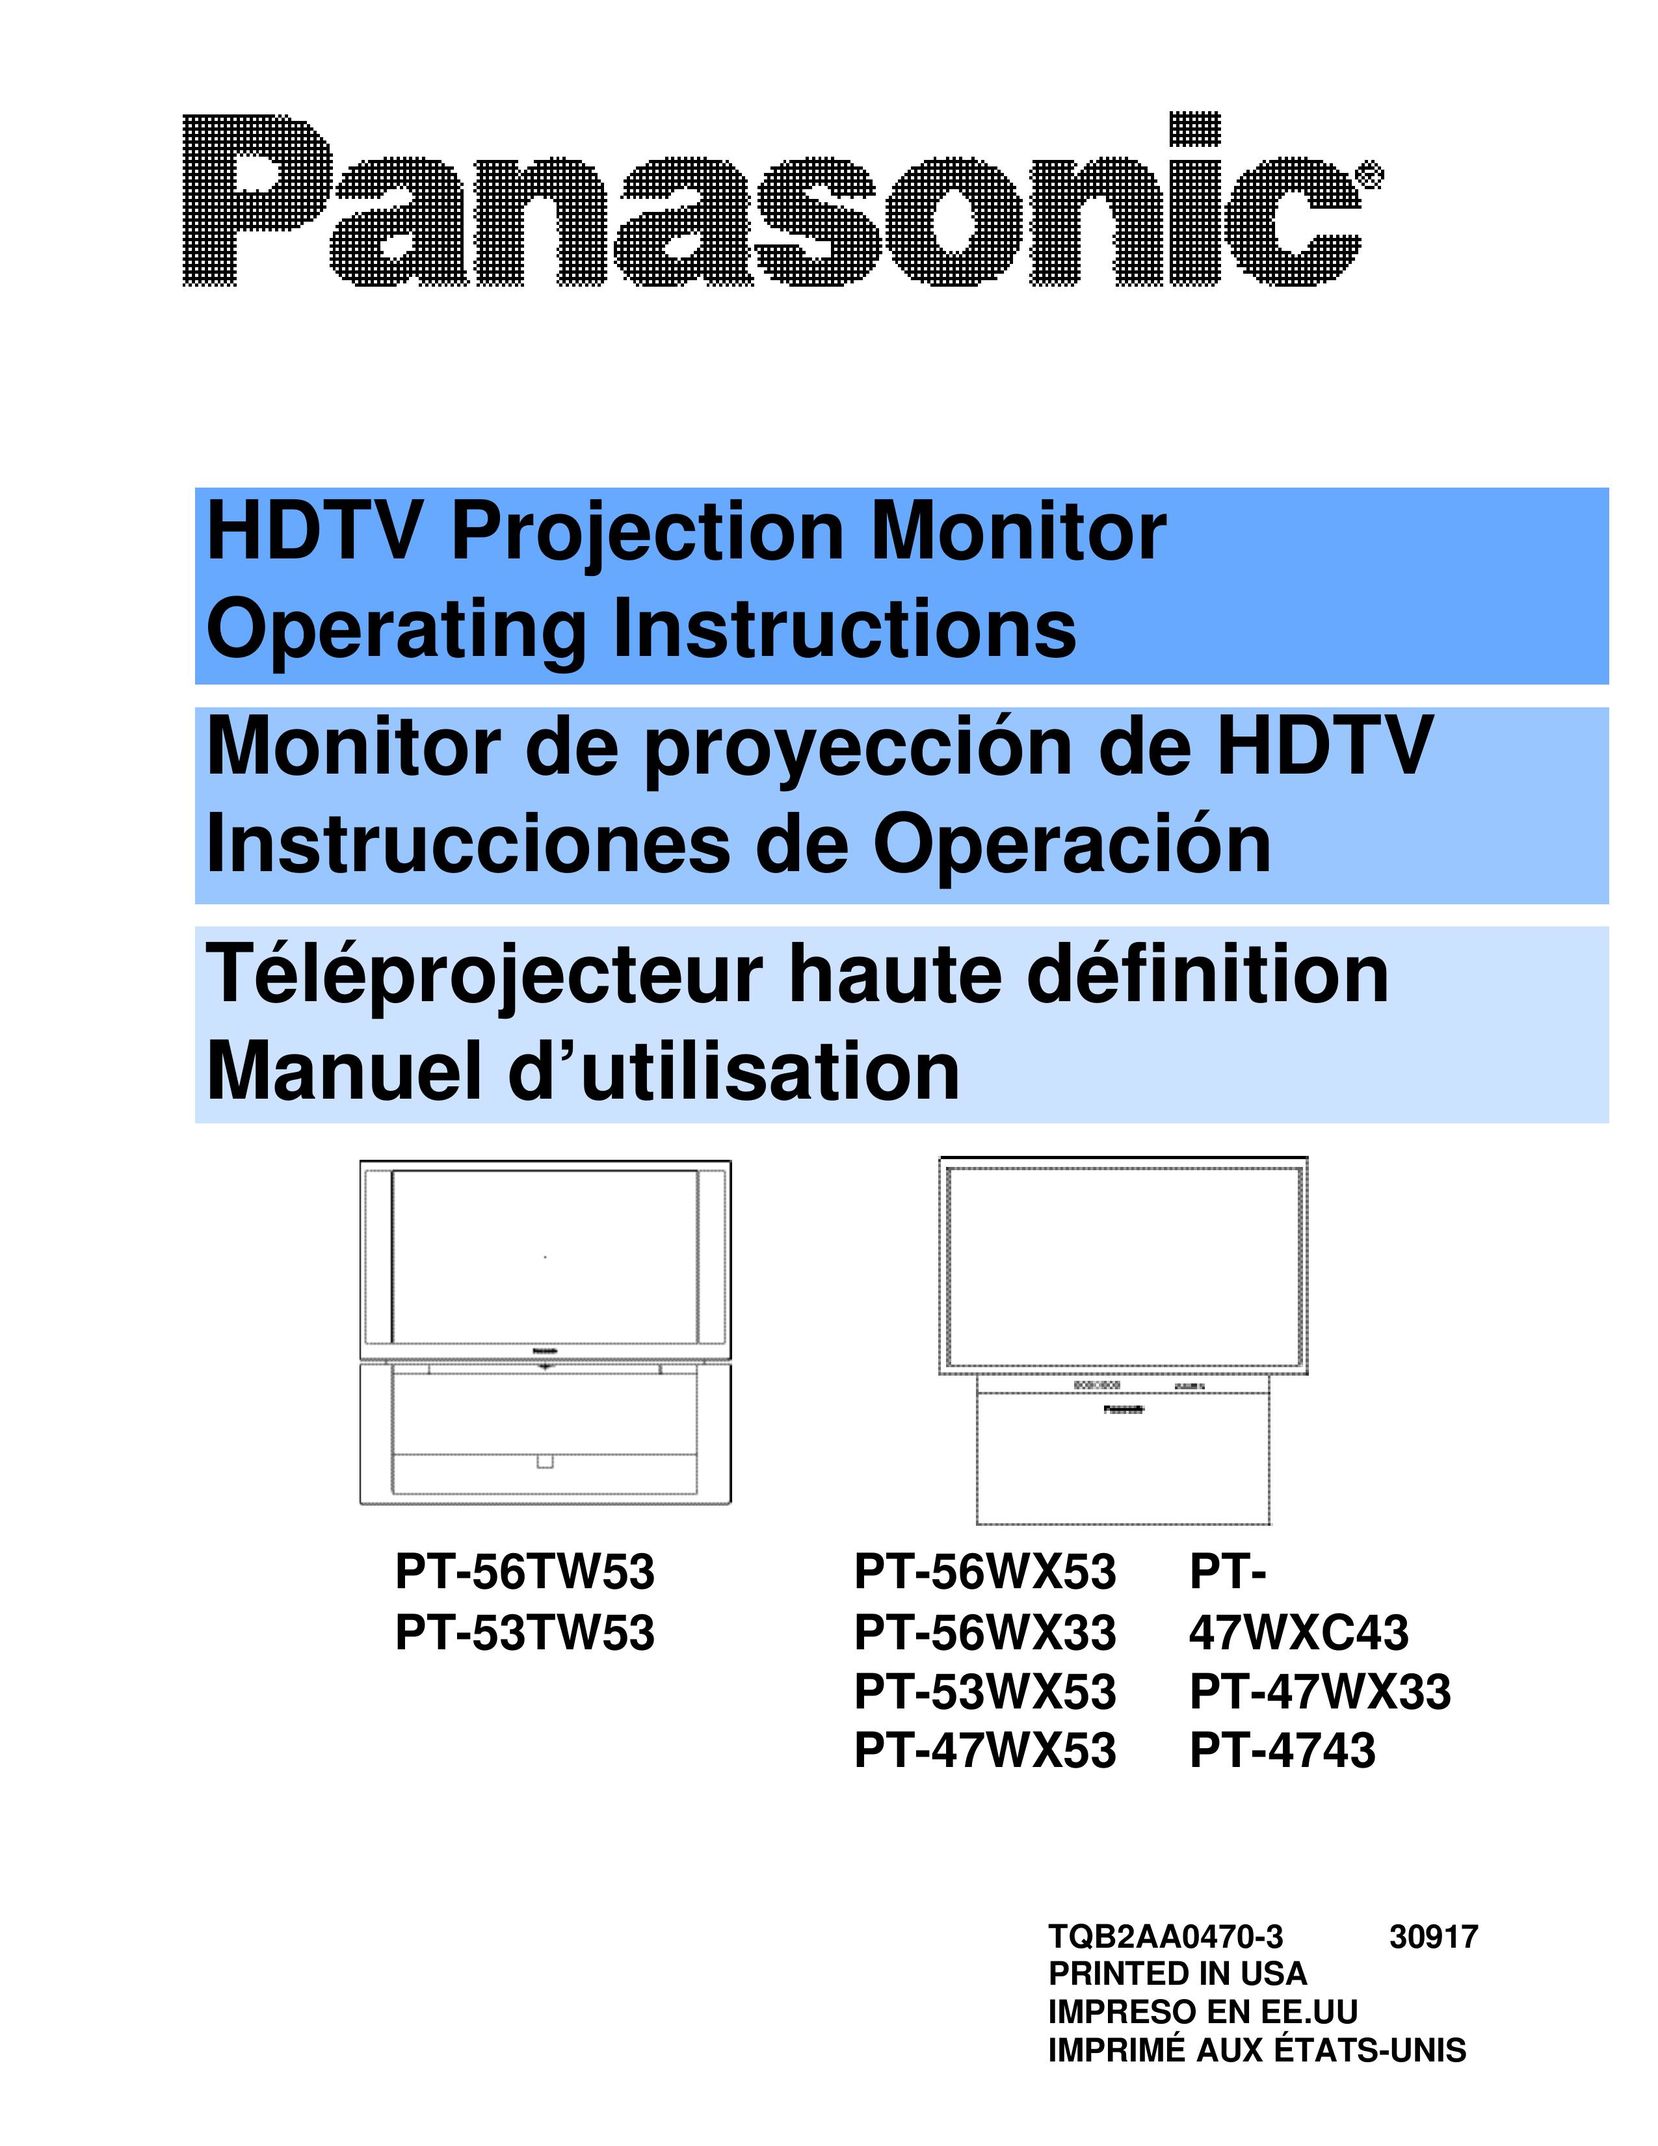 Panasonic PT 53WX53 Projection Television User Manual